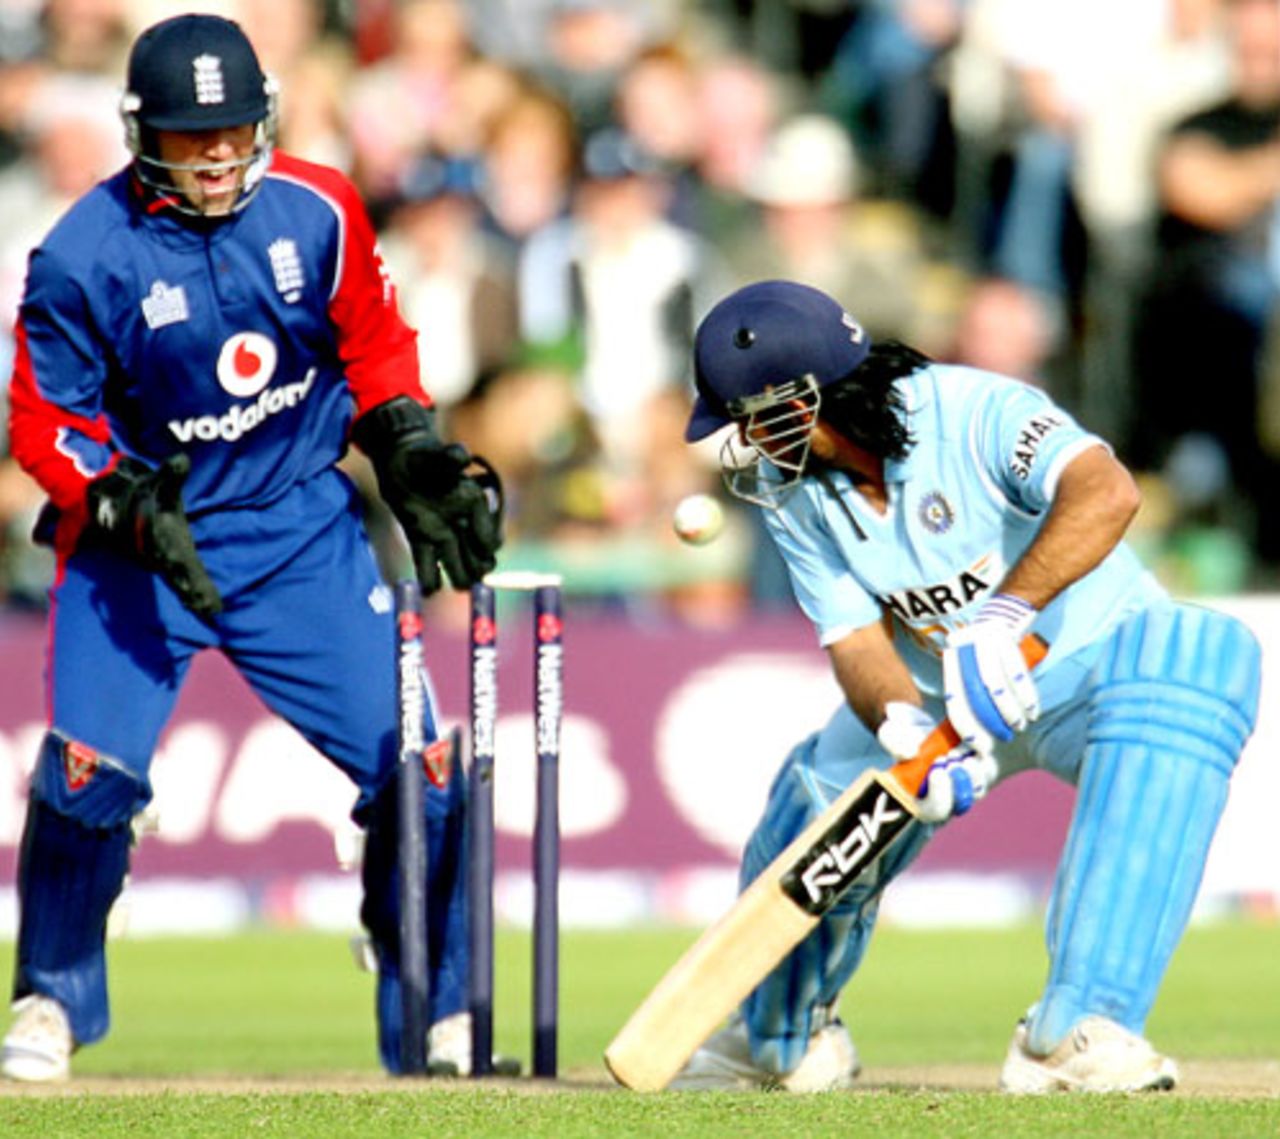 Mahendra Singh Dhoni is bowled by Monty Panesar, England v India, 4th ODI, Old Trafford, August 30, 2007
